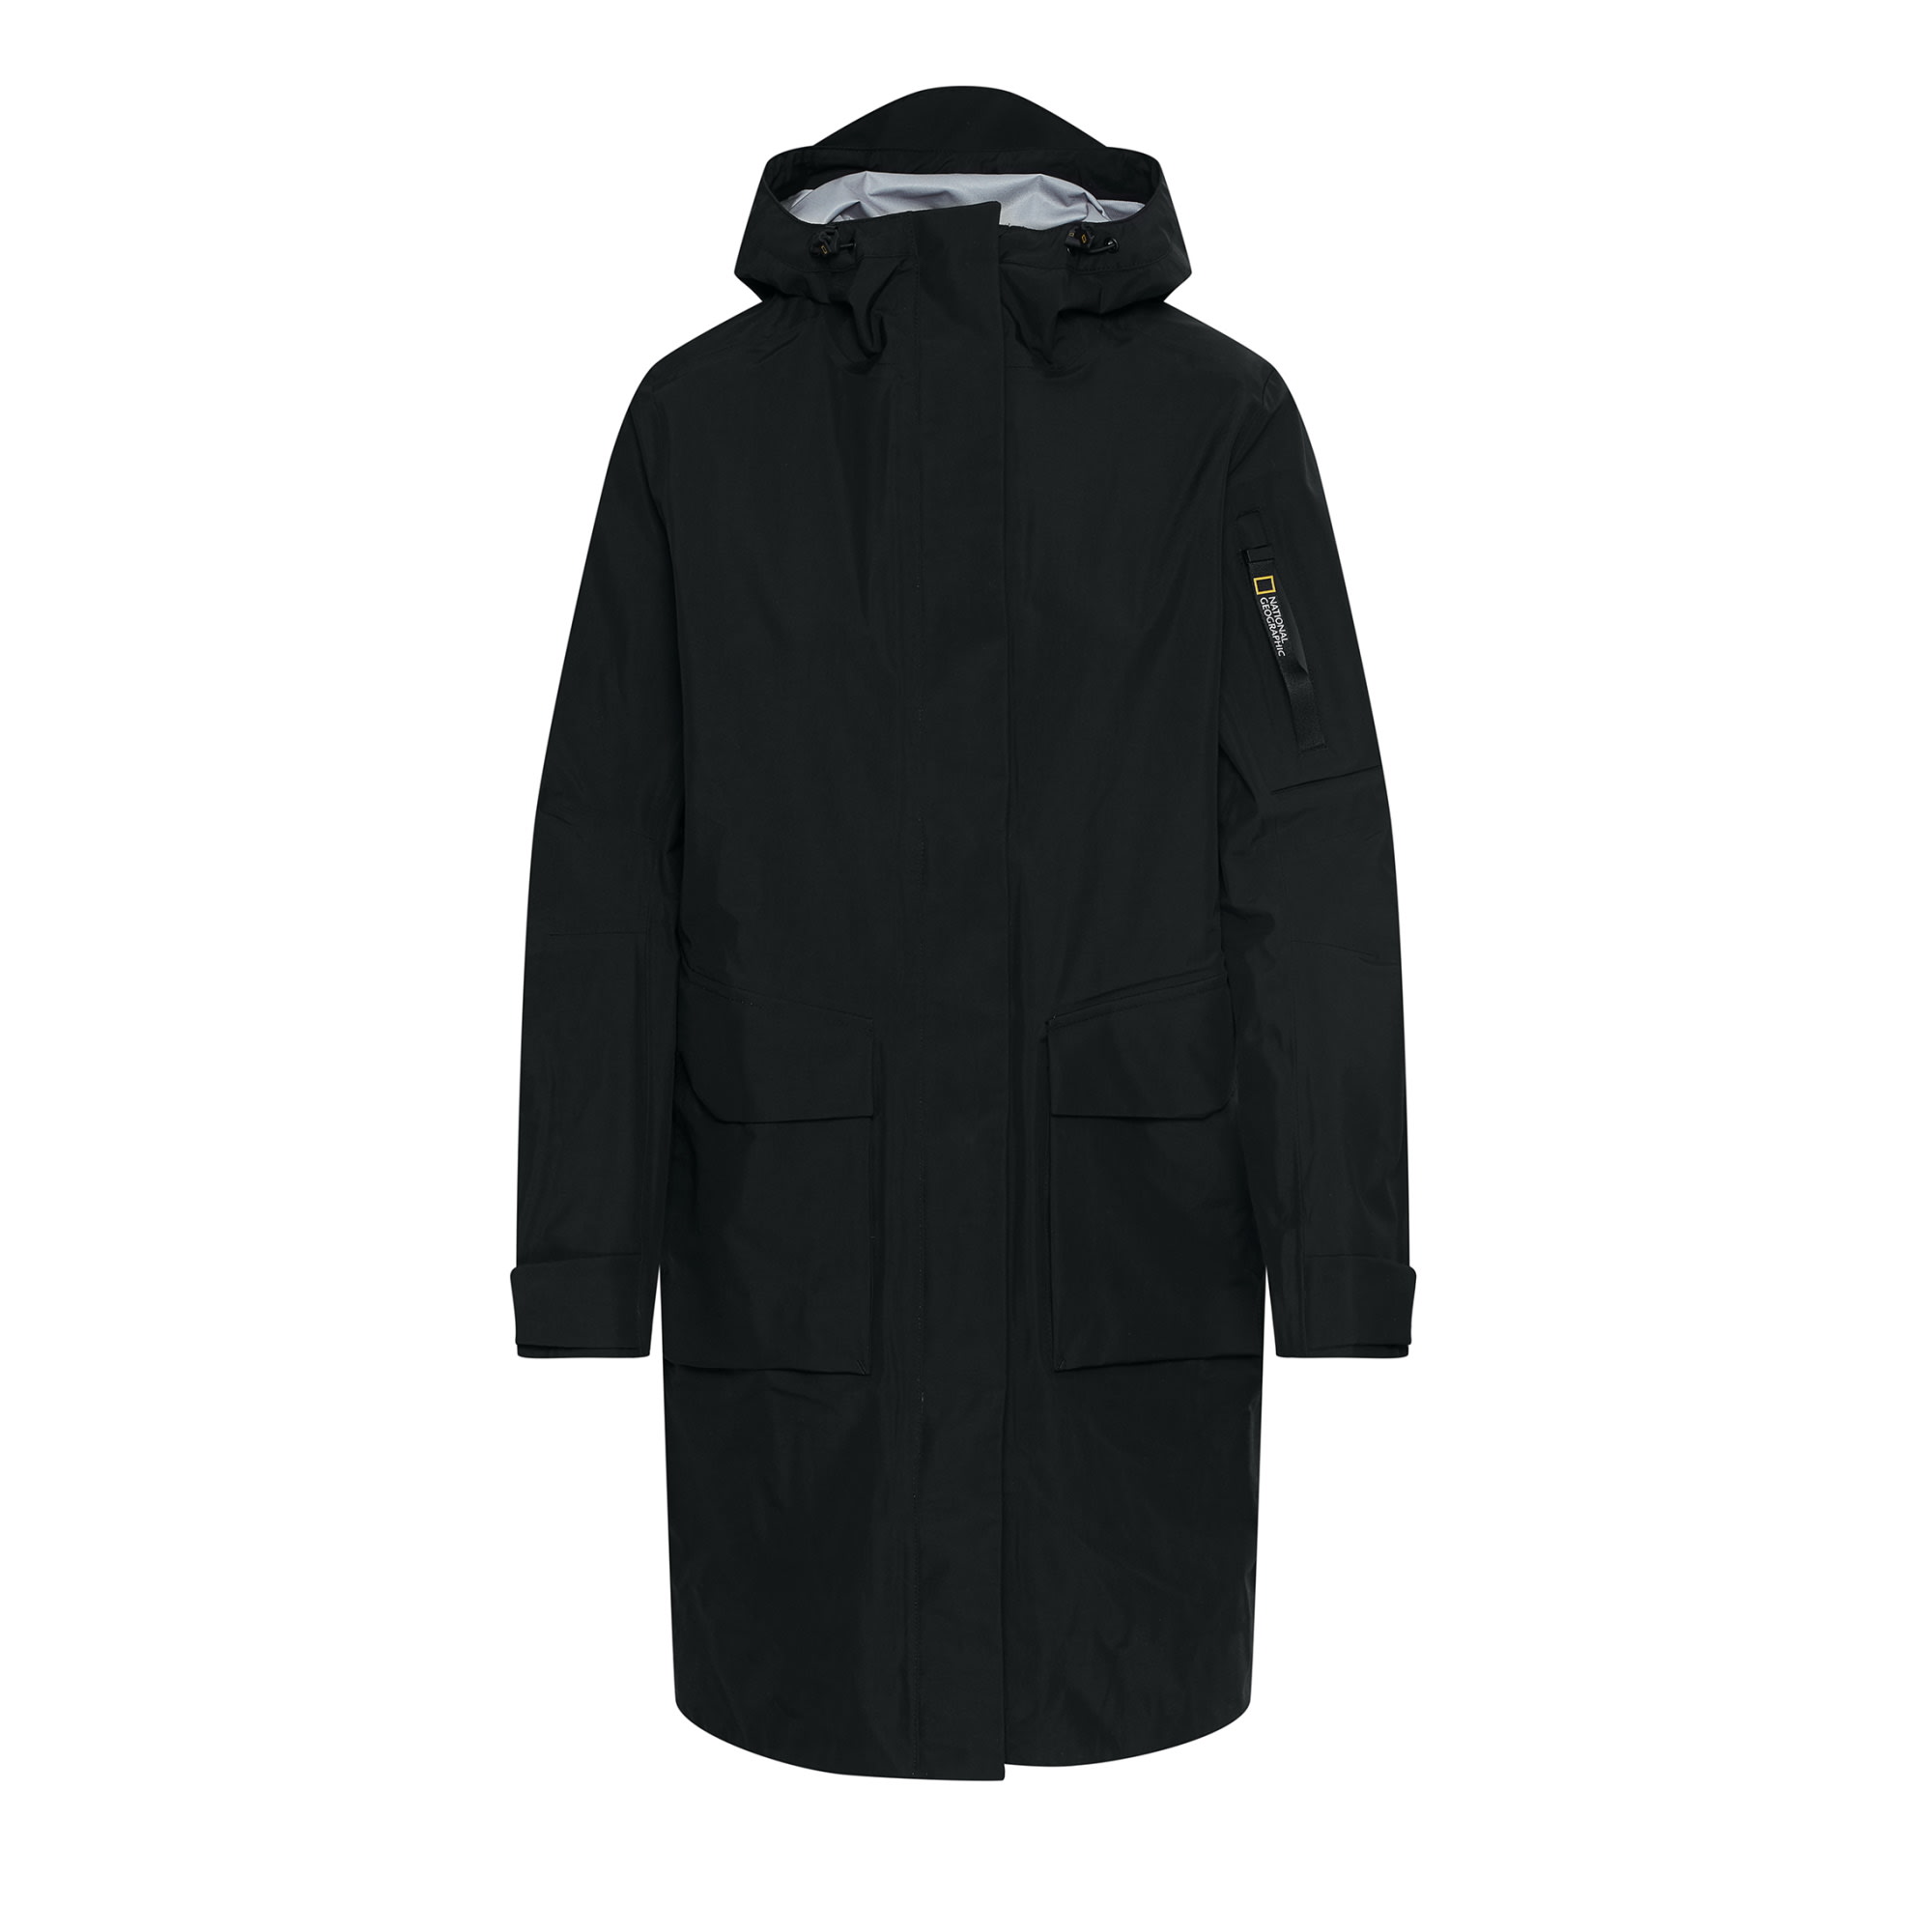 Buy National Geographic Urban Parka from Outnorth